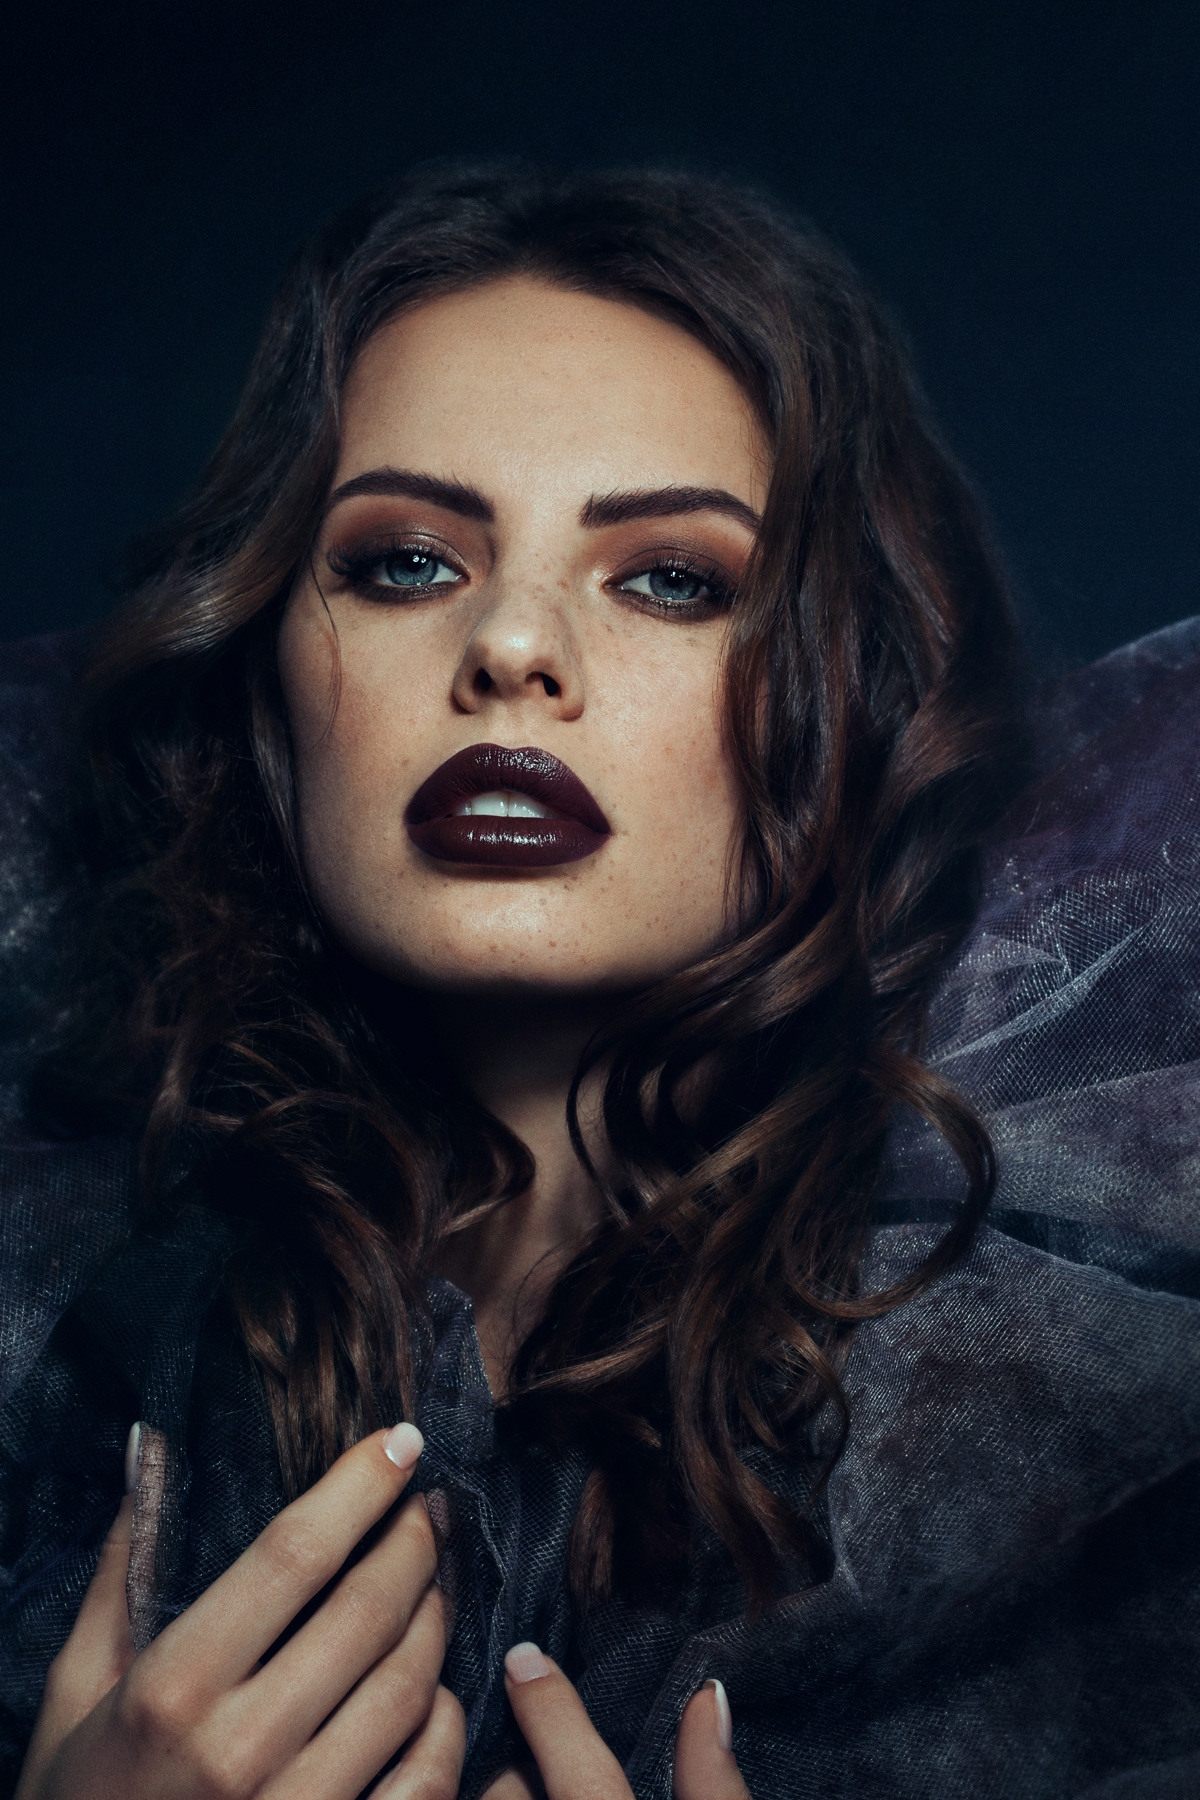 beauty Make Up dark model editorial portrait magazine retouch mysterious freckles